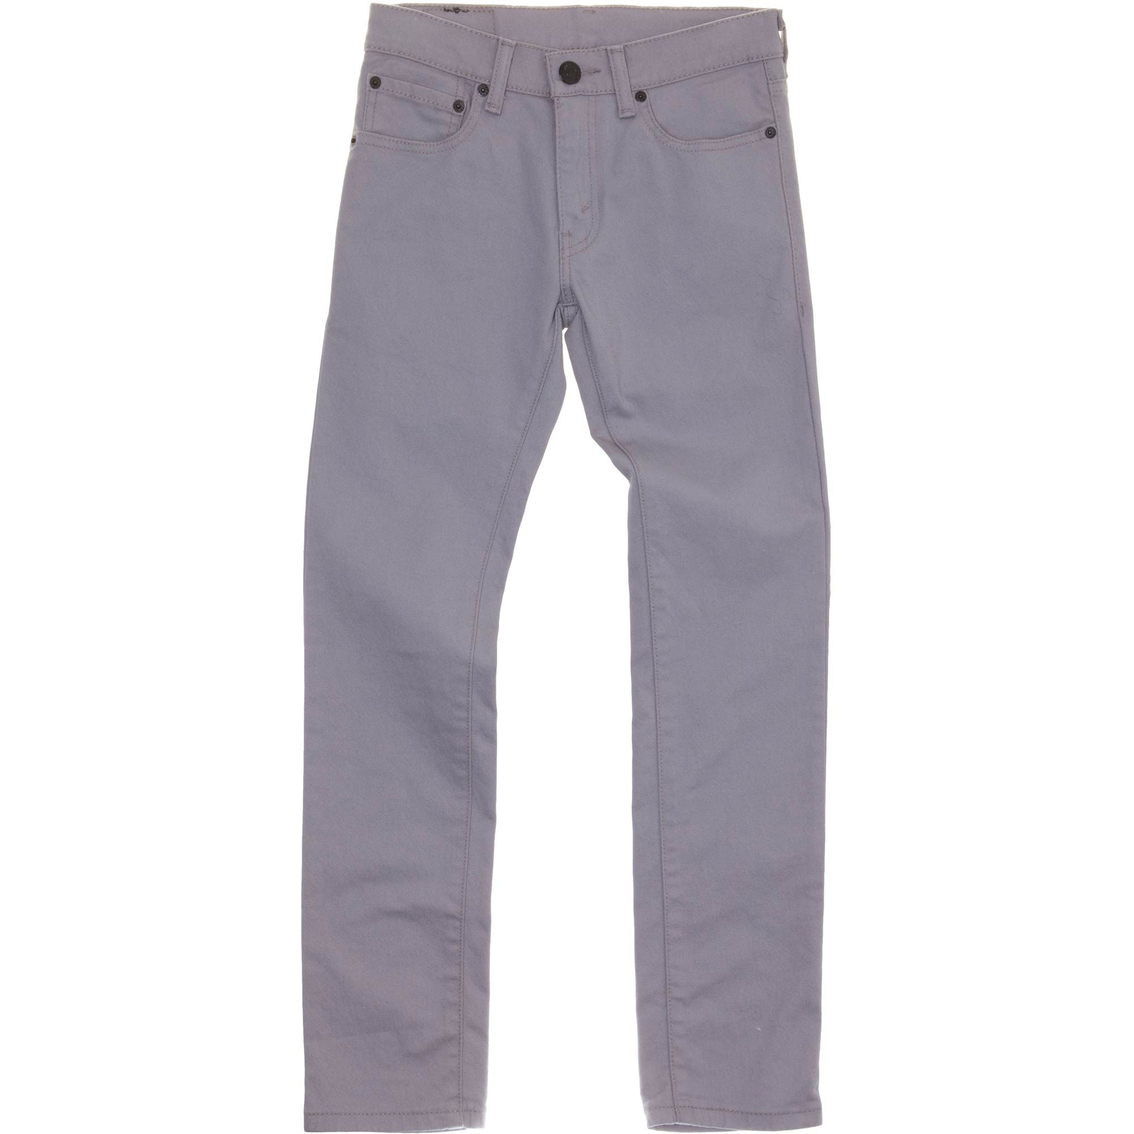 Levi's Boys 510 Super Skinny Jeans | Boys 8-20 | Clothing & Accessories ...